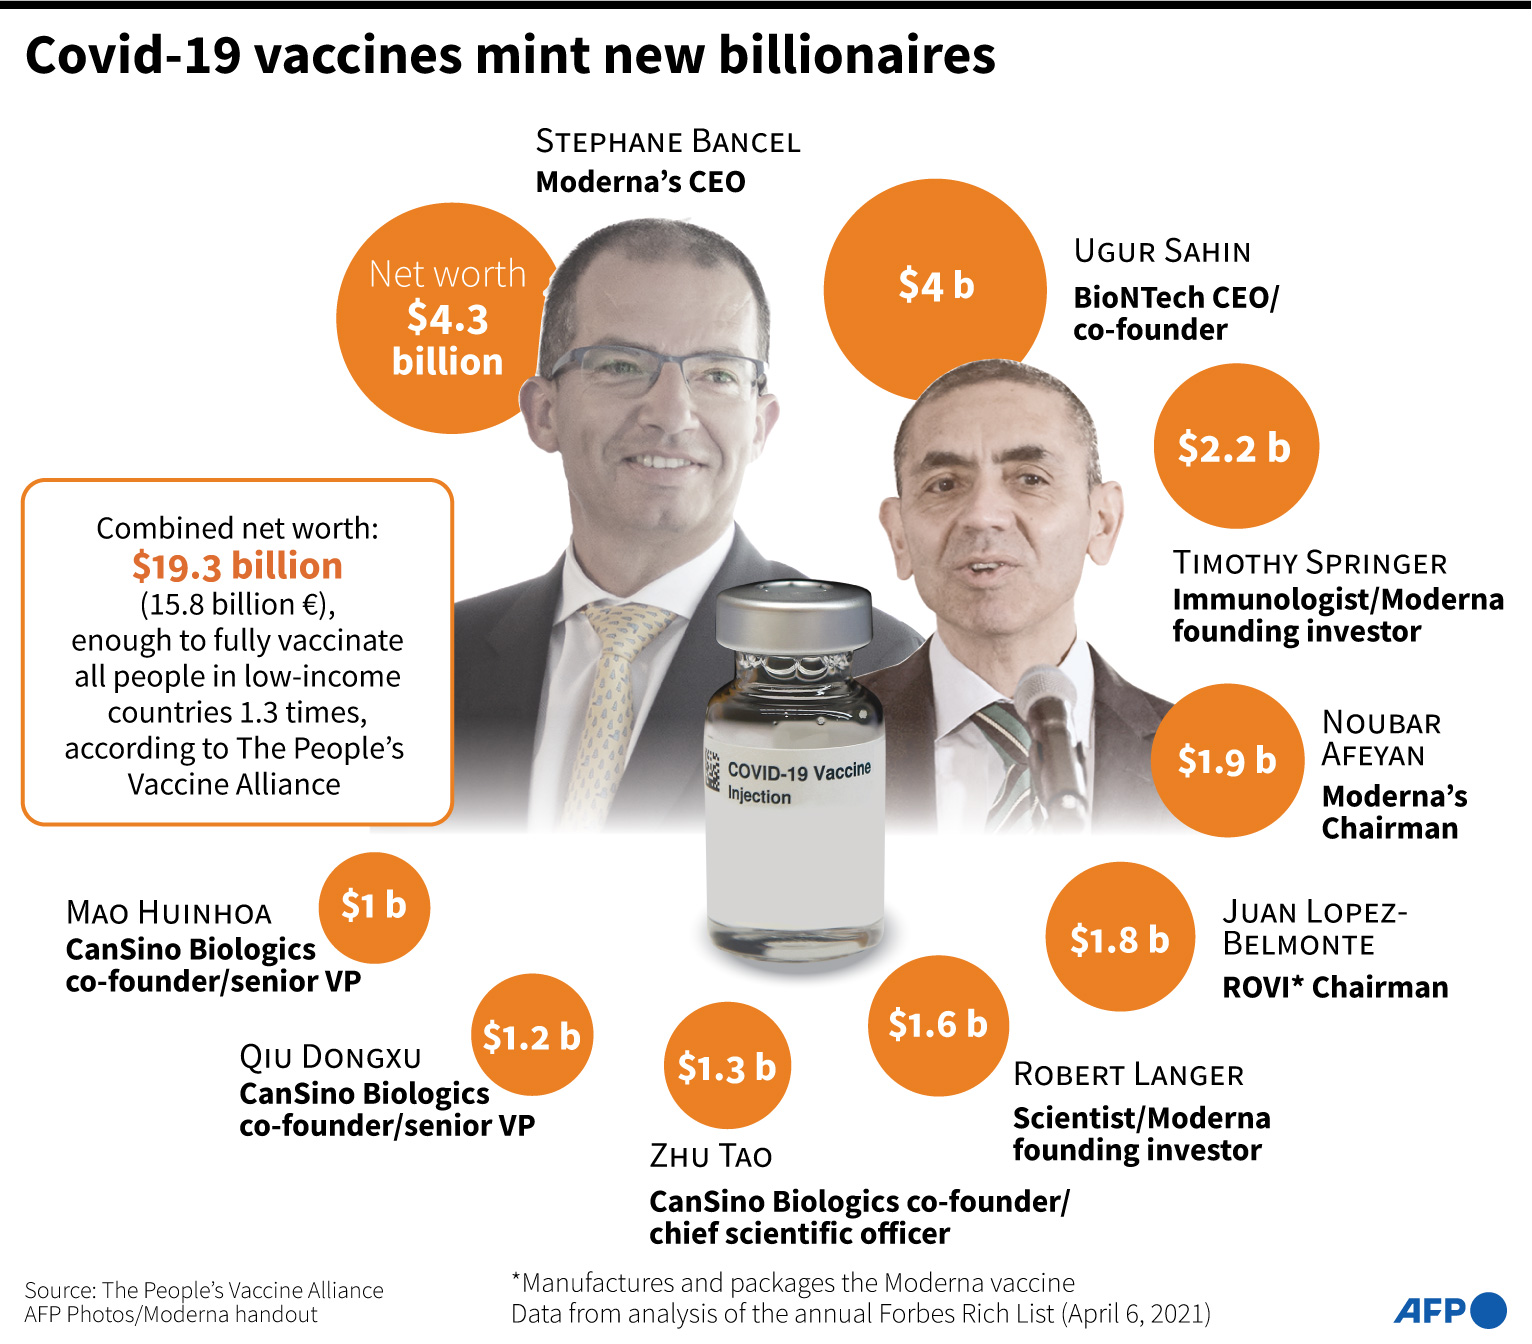 AFP News Agency 在Twitter 上："The nine new billionaires spawned from Covid-19  vaccines with combined wealth greater than the cost of vaccinating world's  poorest countries, according to The People's Vaccine Alliance: "The